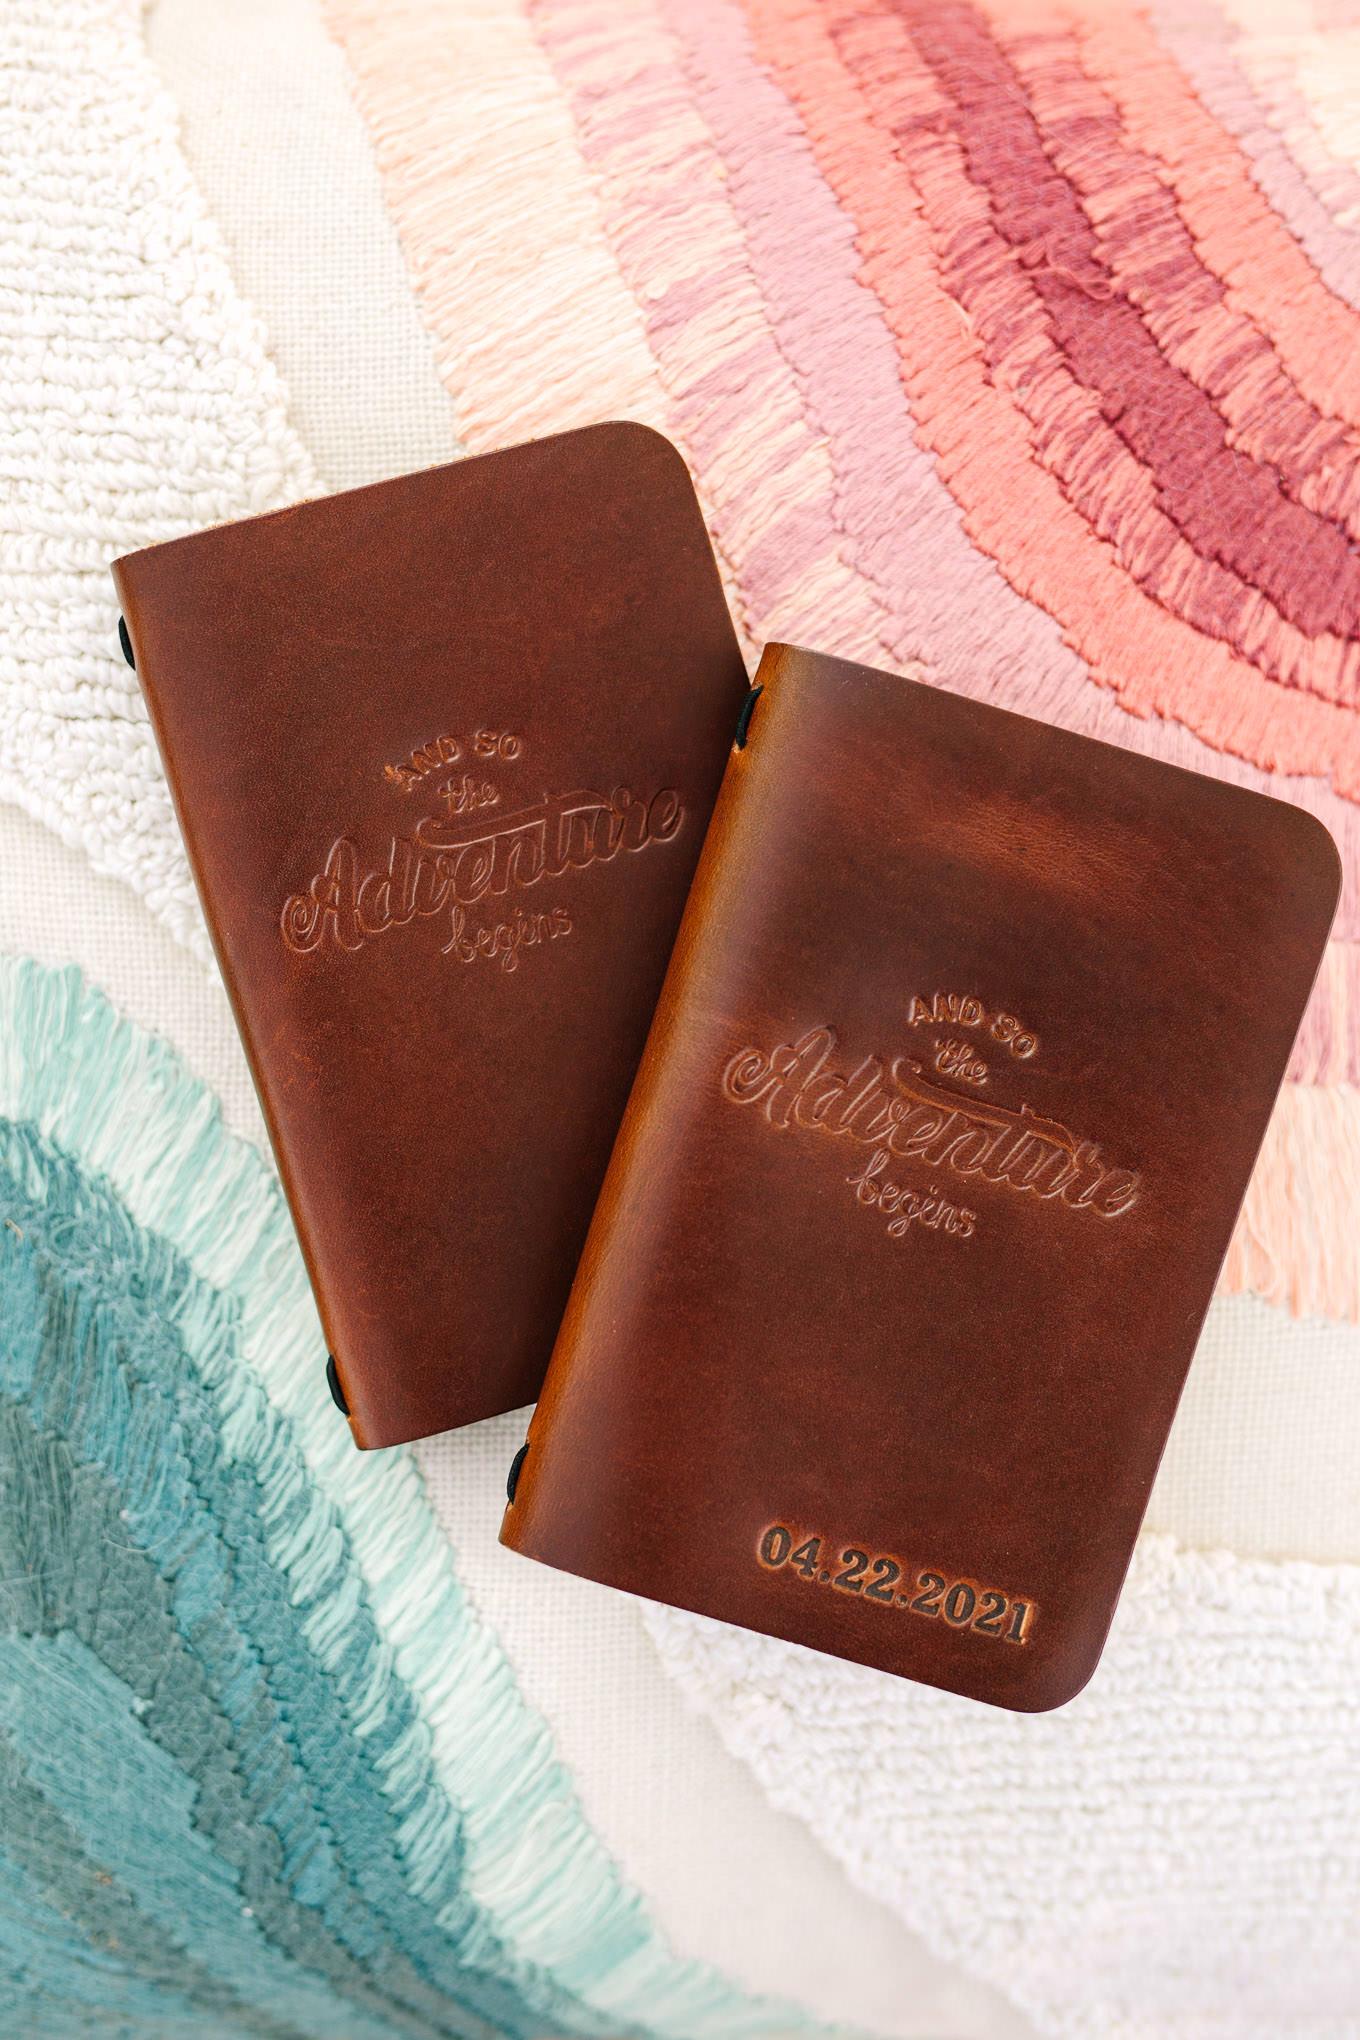 Leather vow books | Zion Under Canvas Elopement at Sunrise | Colorful adventure elopement photography | #utahelopement #zionelopement #zionwedding #undercanvaszion #sunriseelopement  Source: Mary Costa Photography | Los Angeles